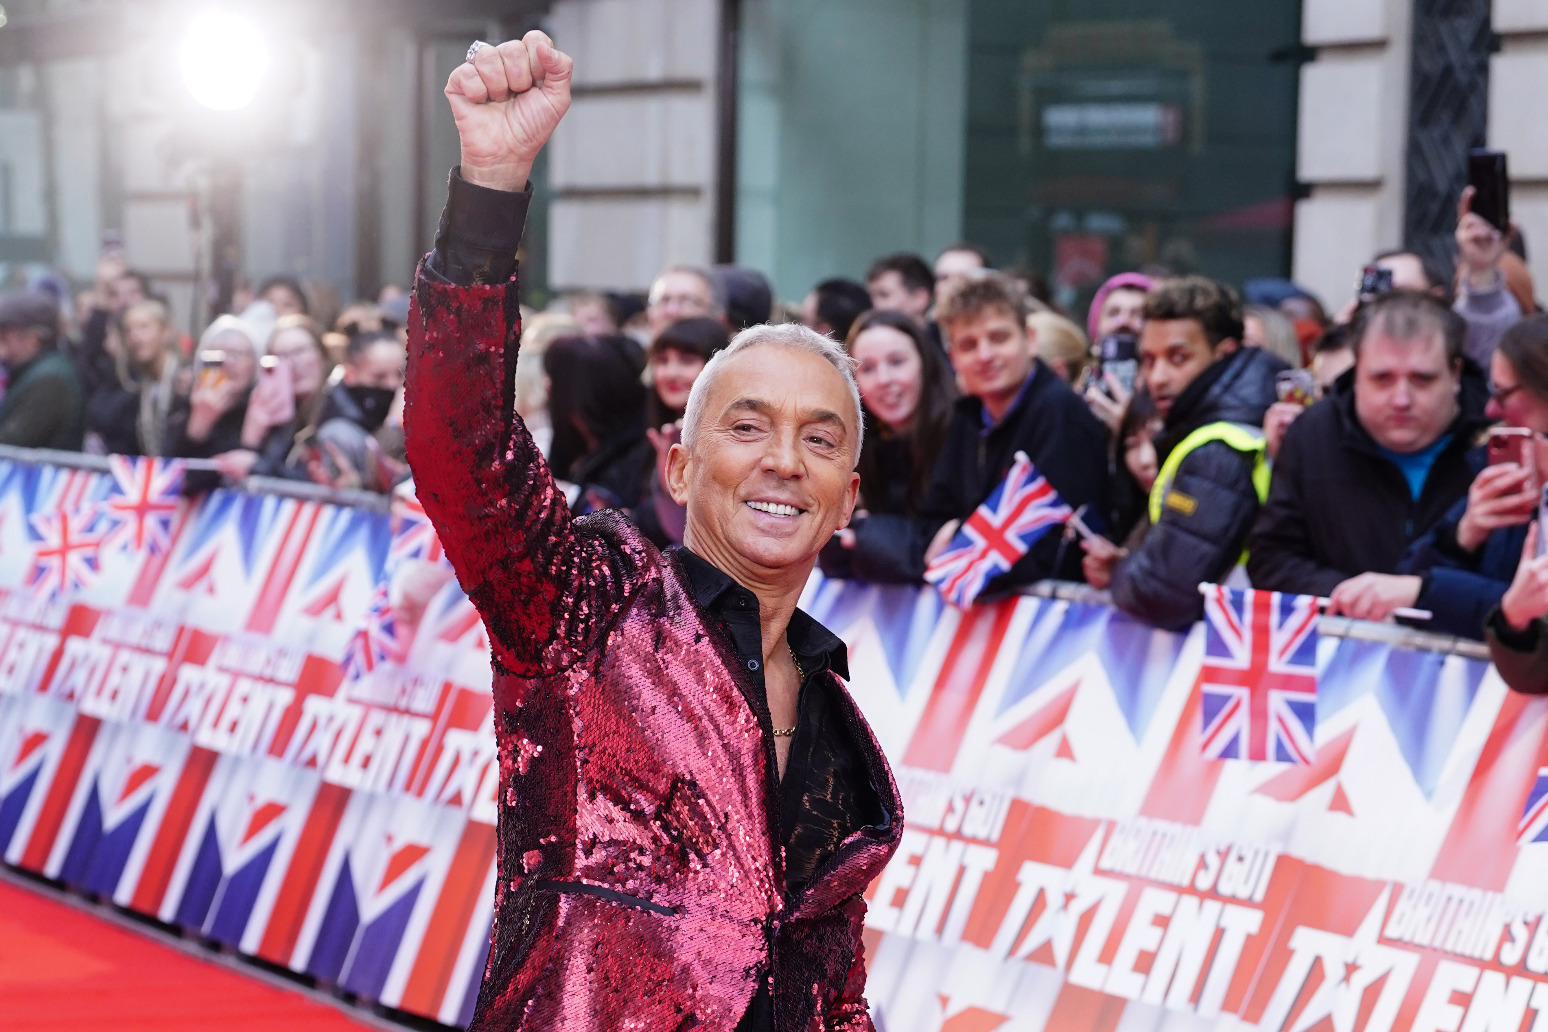 Bruno Tonioli blows kiss to fans as he arrives at Britain’s Got Talent auditions 